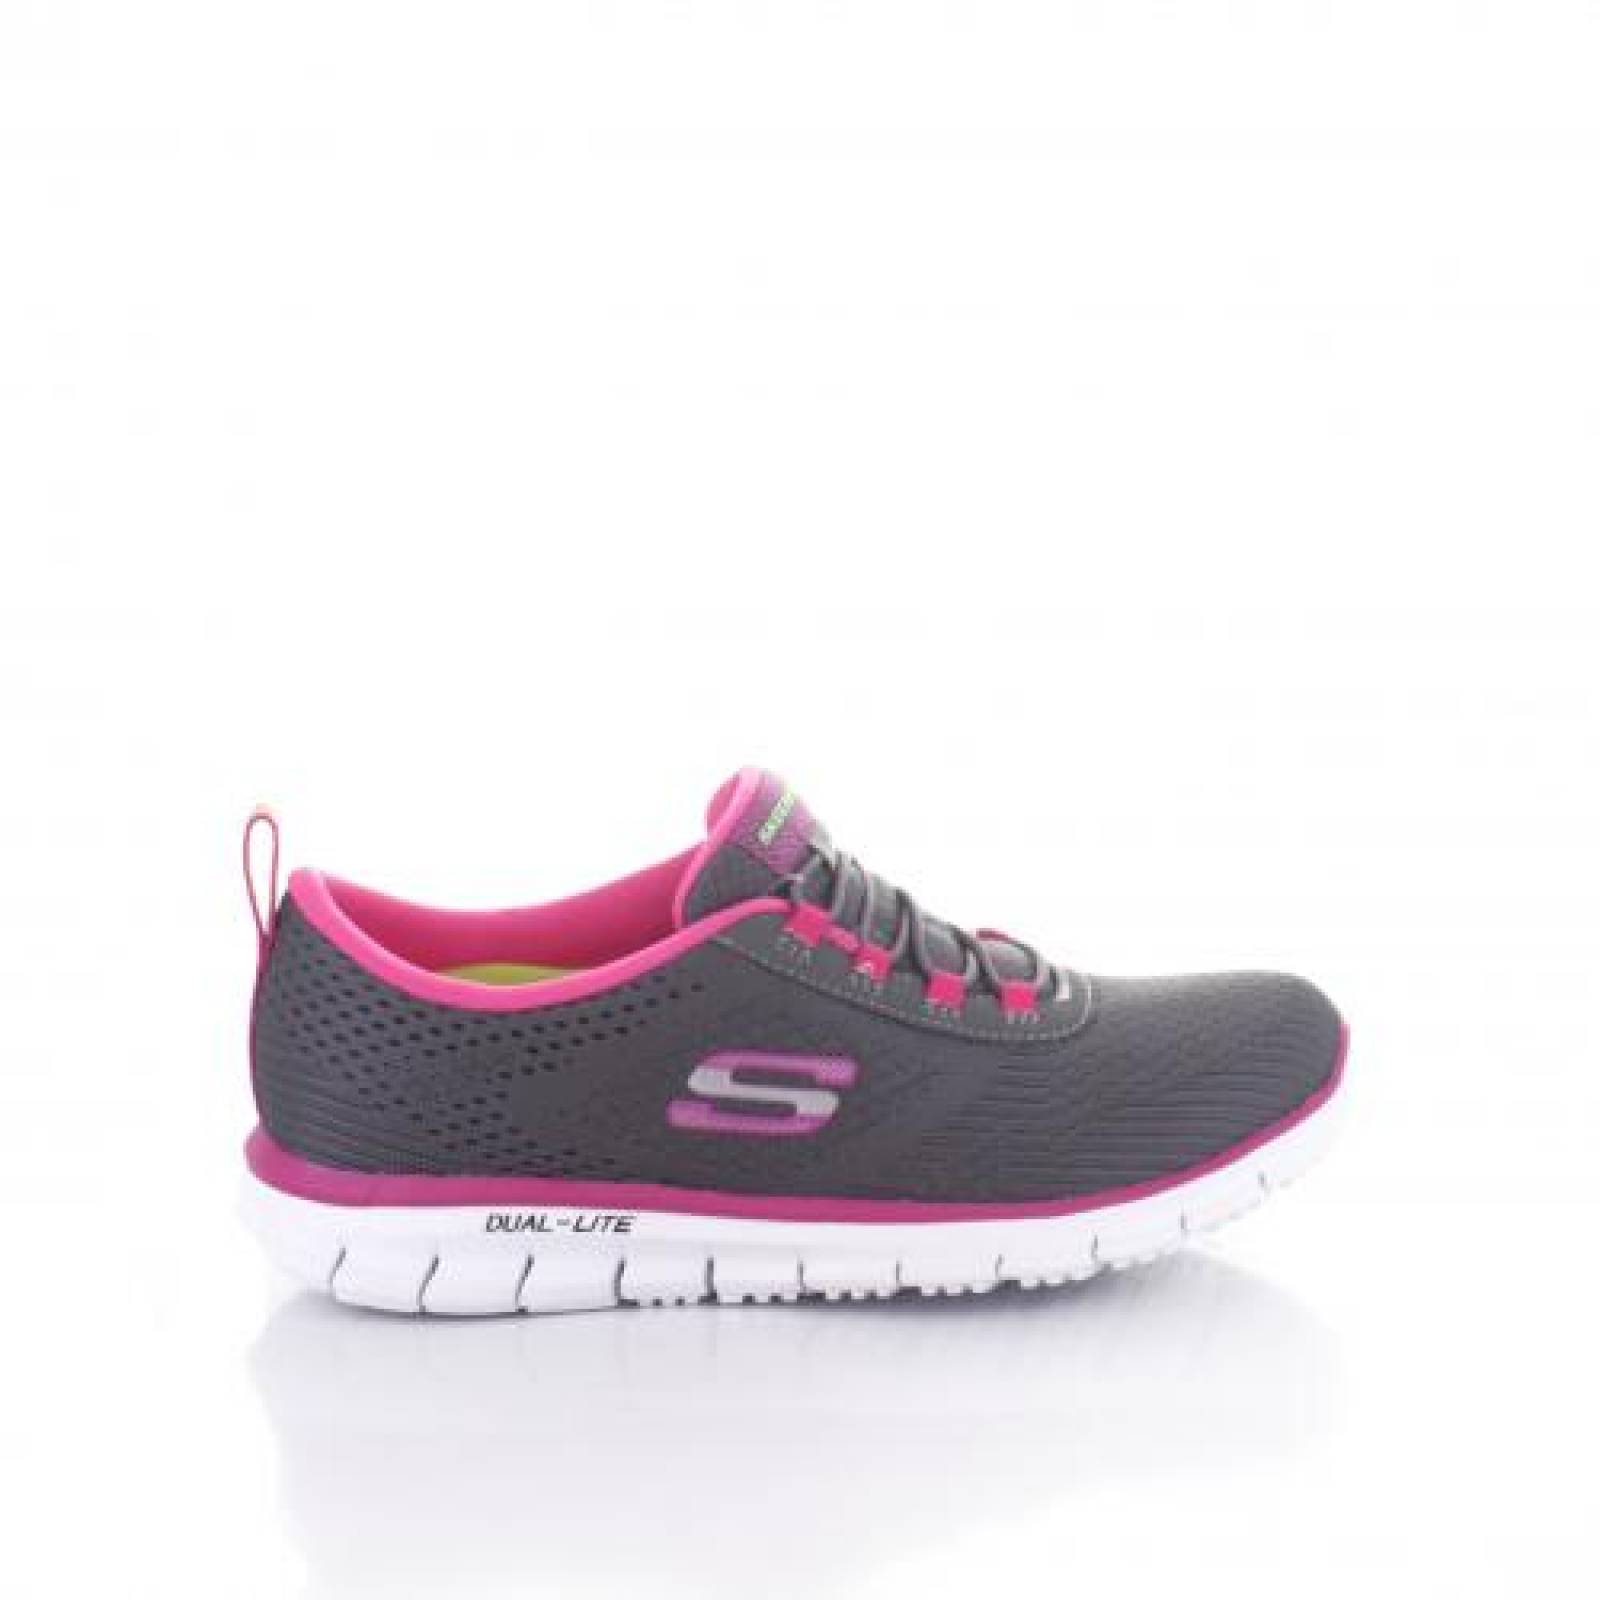 Tenis para Mujer Sckechers ST332 056153 Color Gris rosa